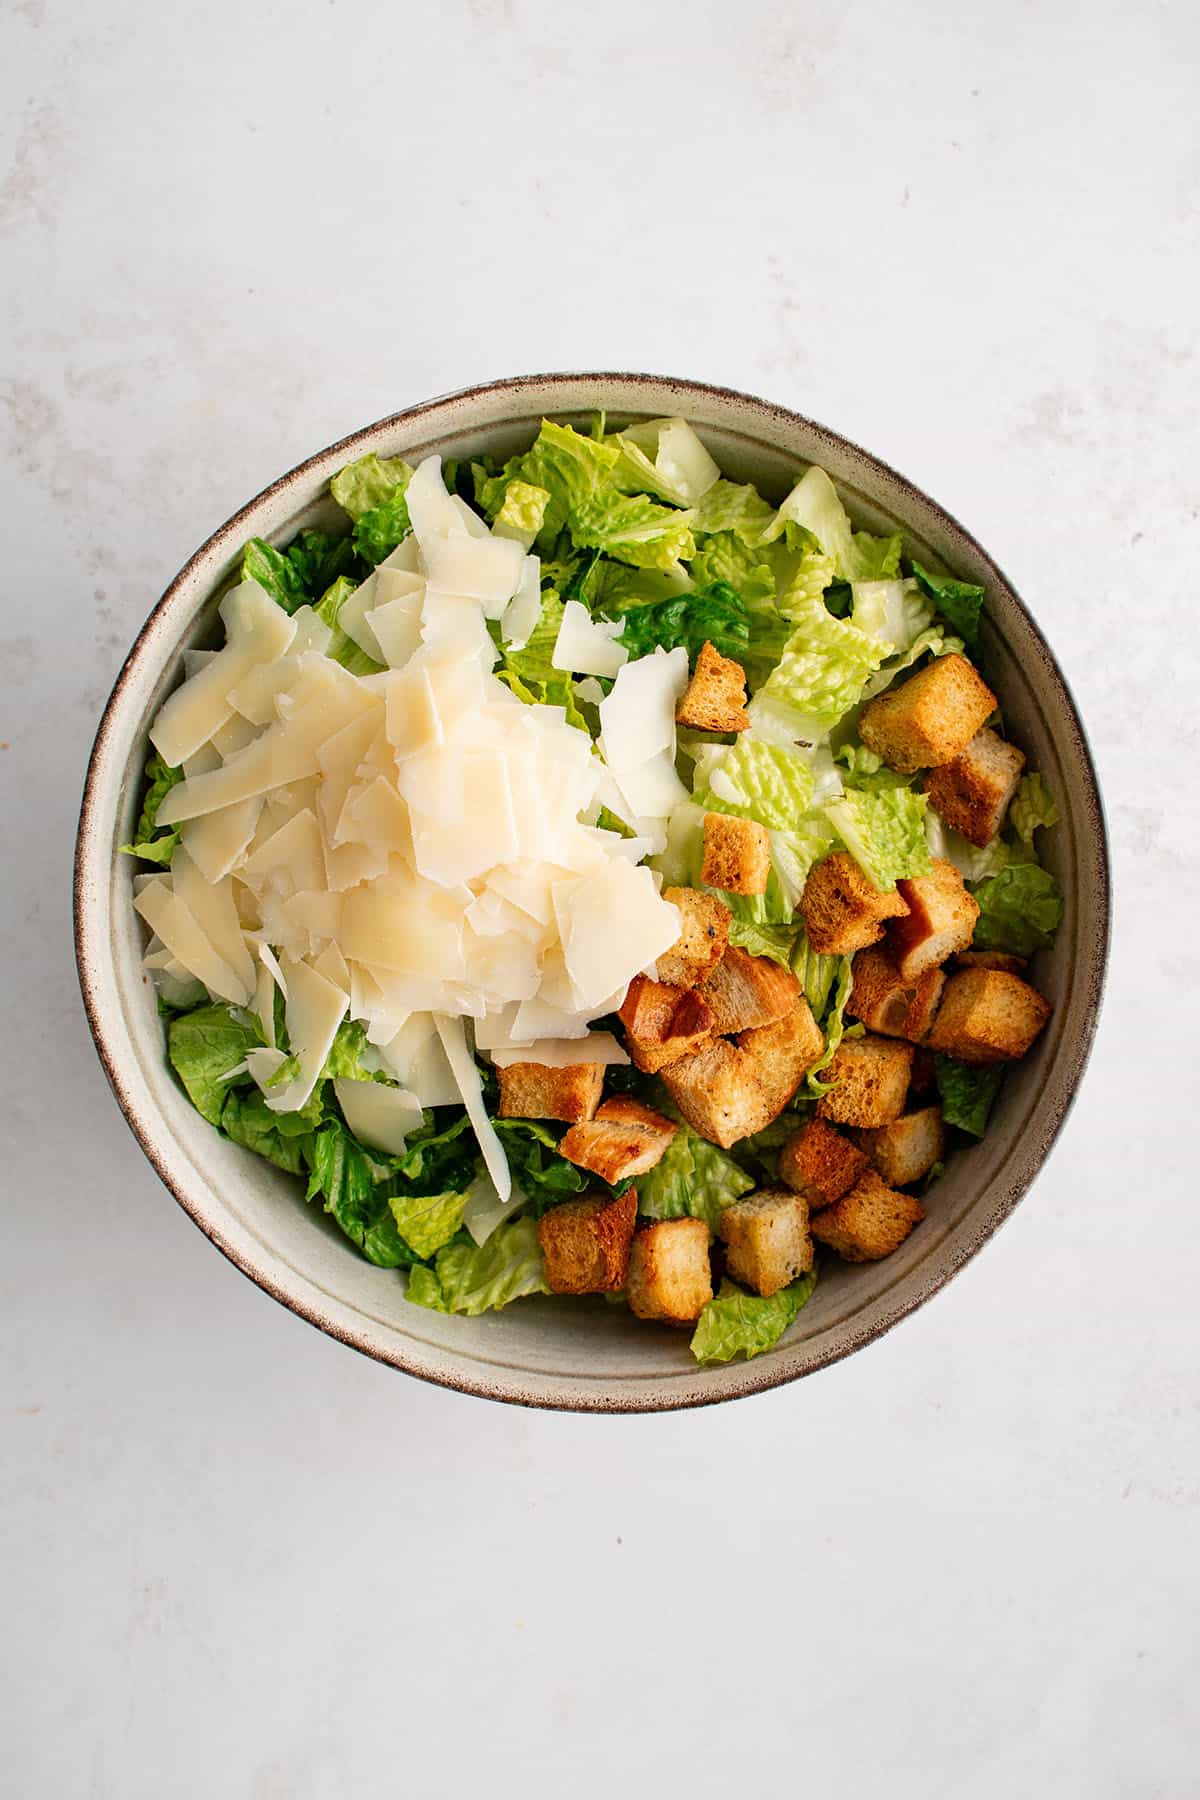 romaine lettuce, croutons, and parmesan cheese in a bowl